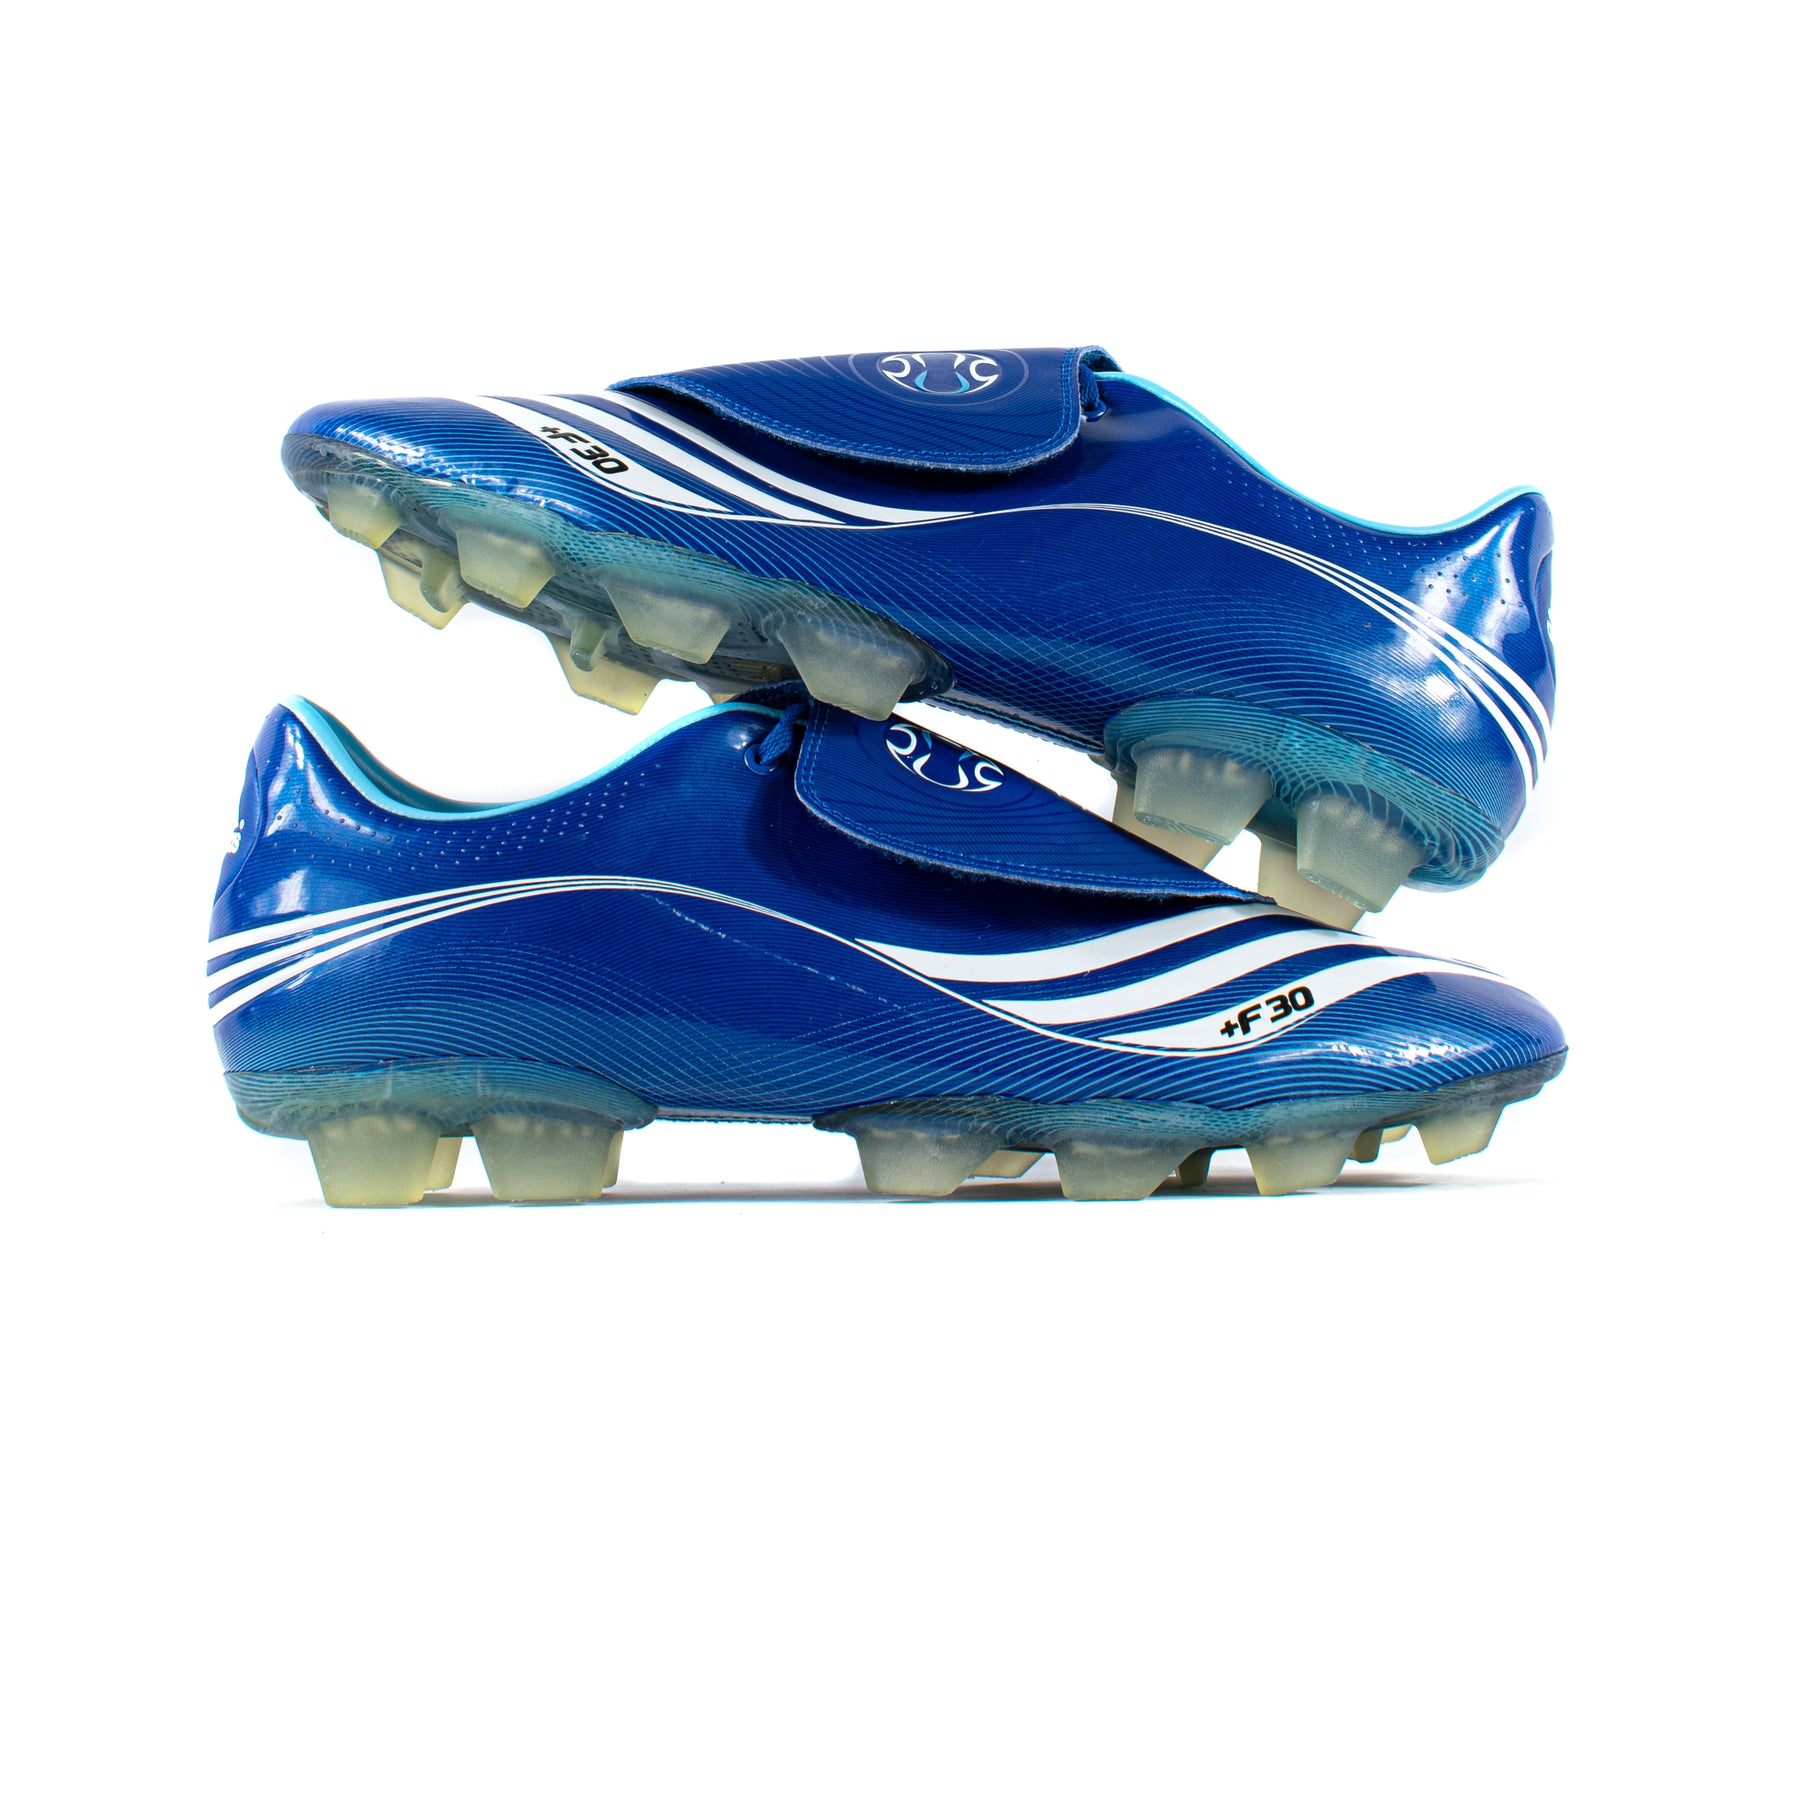 Proceso Parque jurásico mineral Adidas F30.7 Blue FG – Classic Soccer Cleats